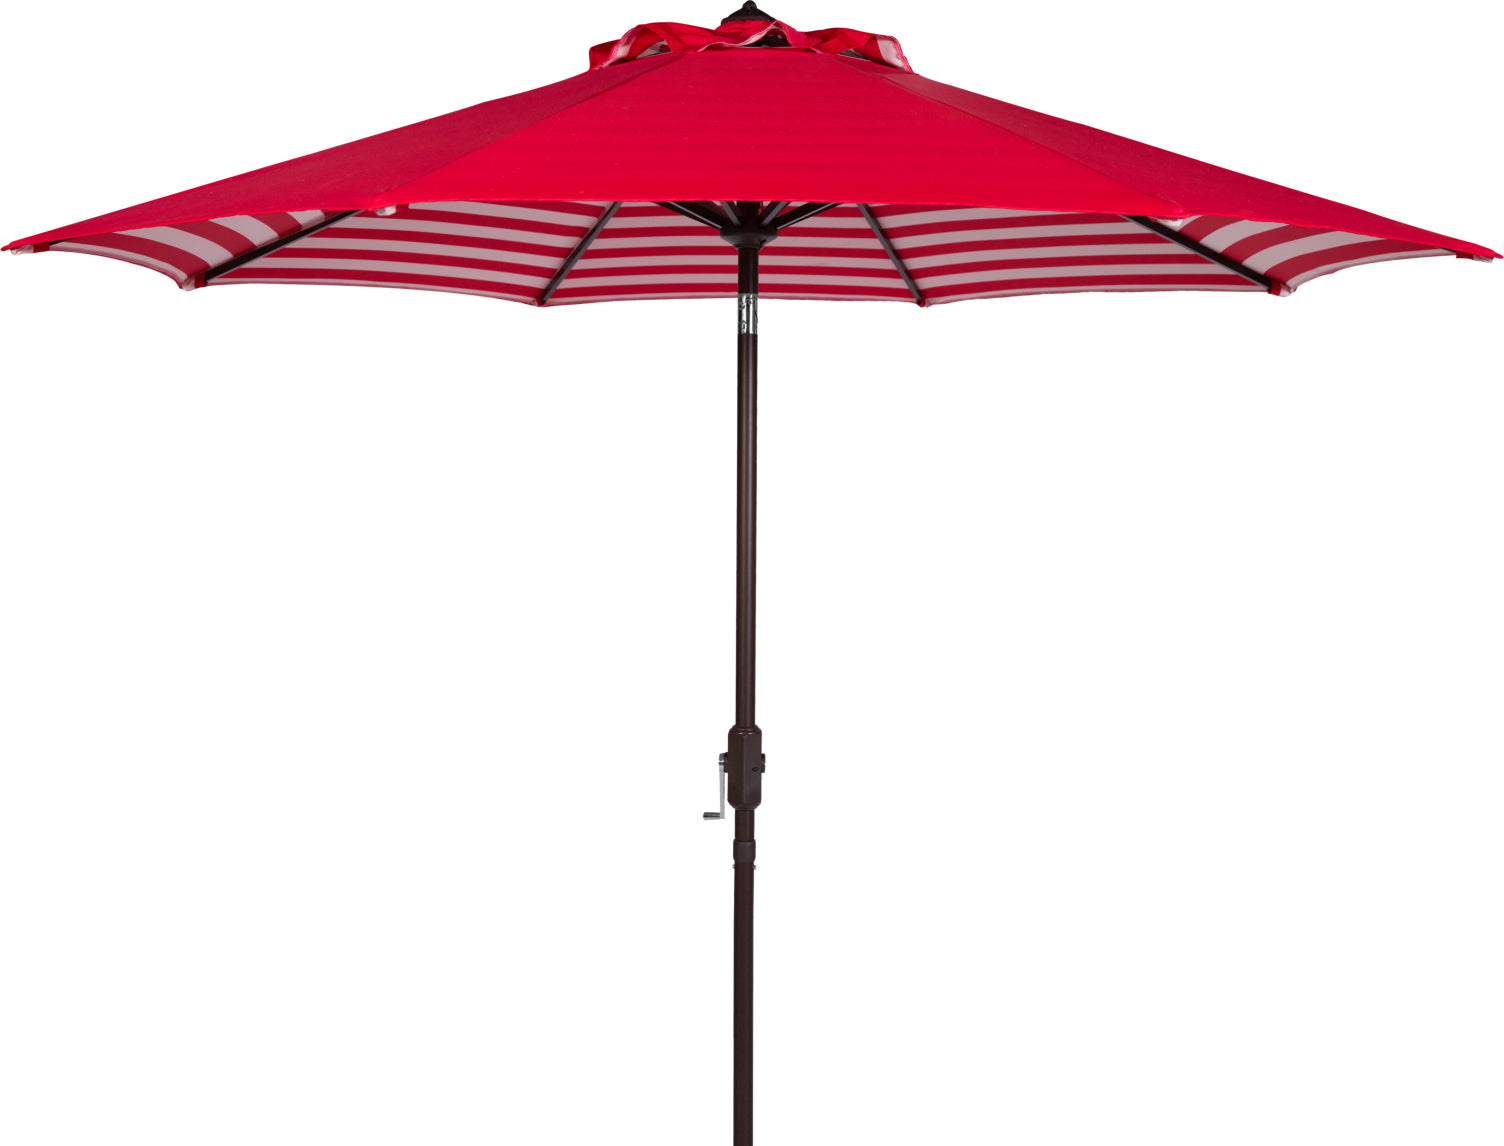 Safavieh Athens Inside Out Striped 9ft Crank Outdoor Auto Tilt Umbrella Red/White Furniture main image